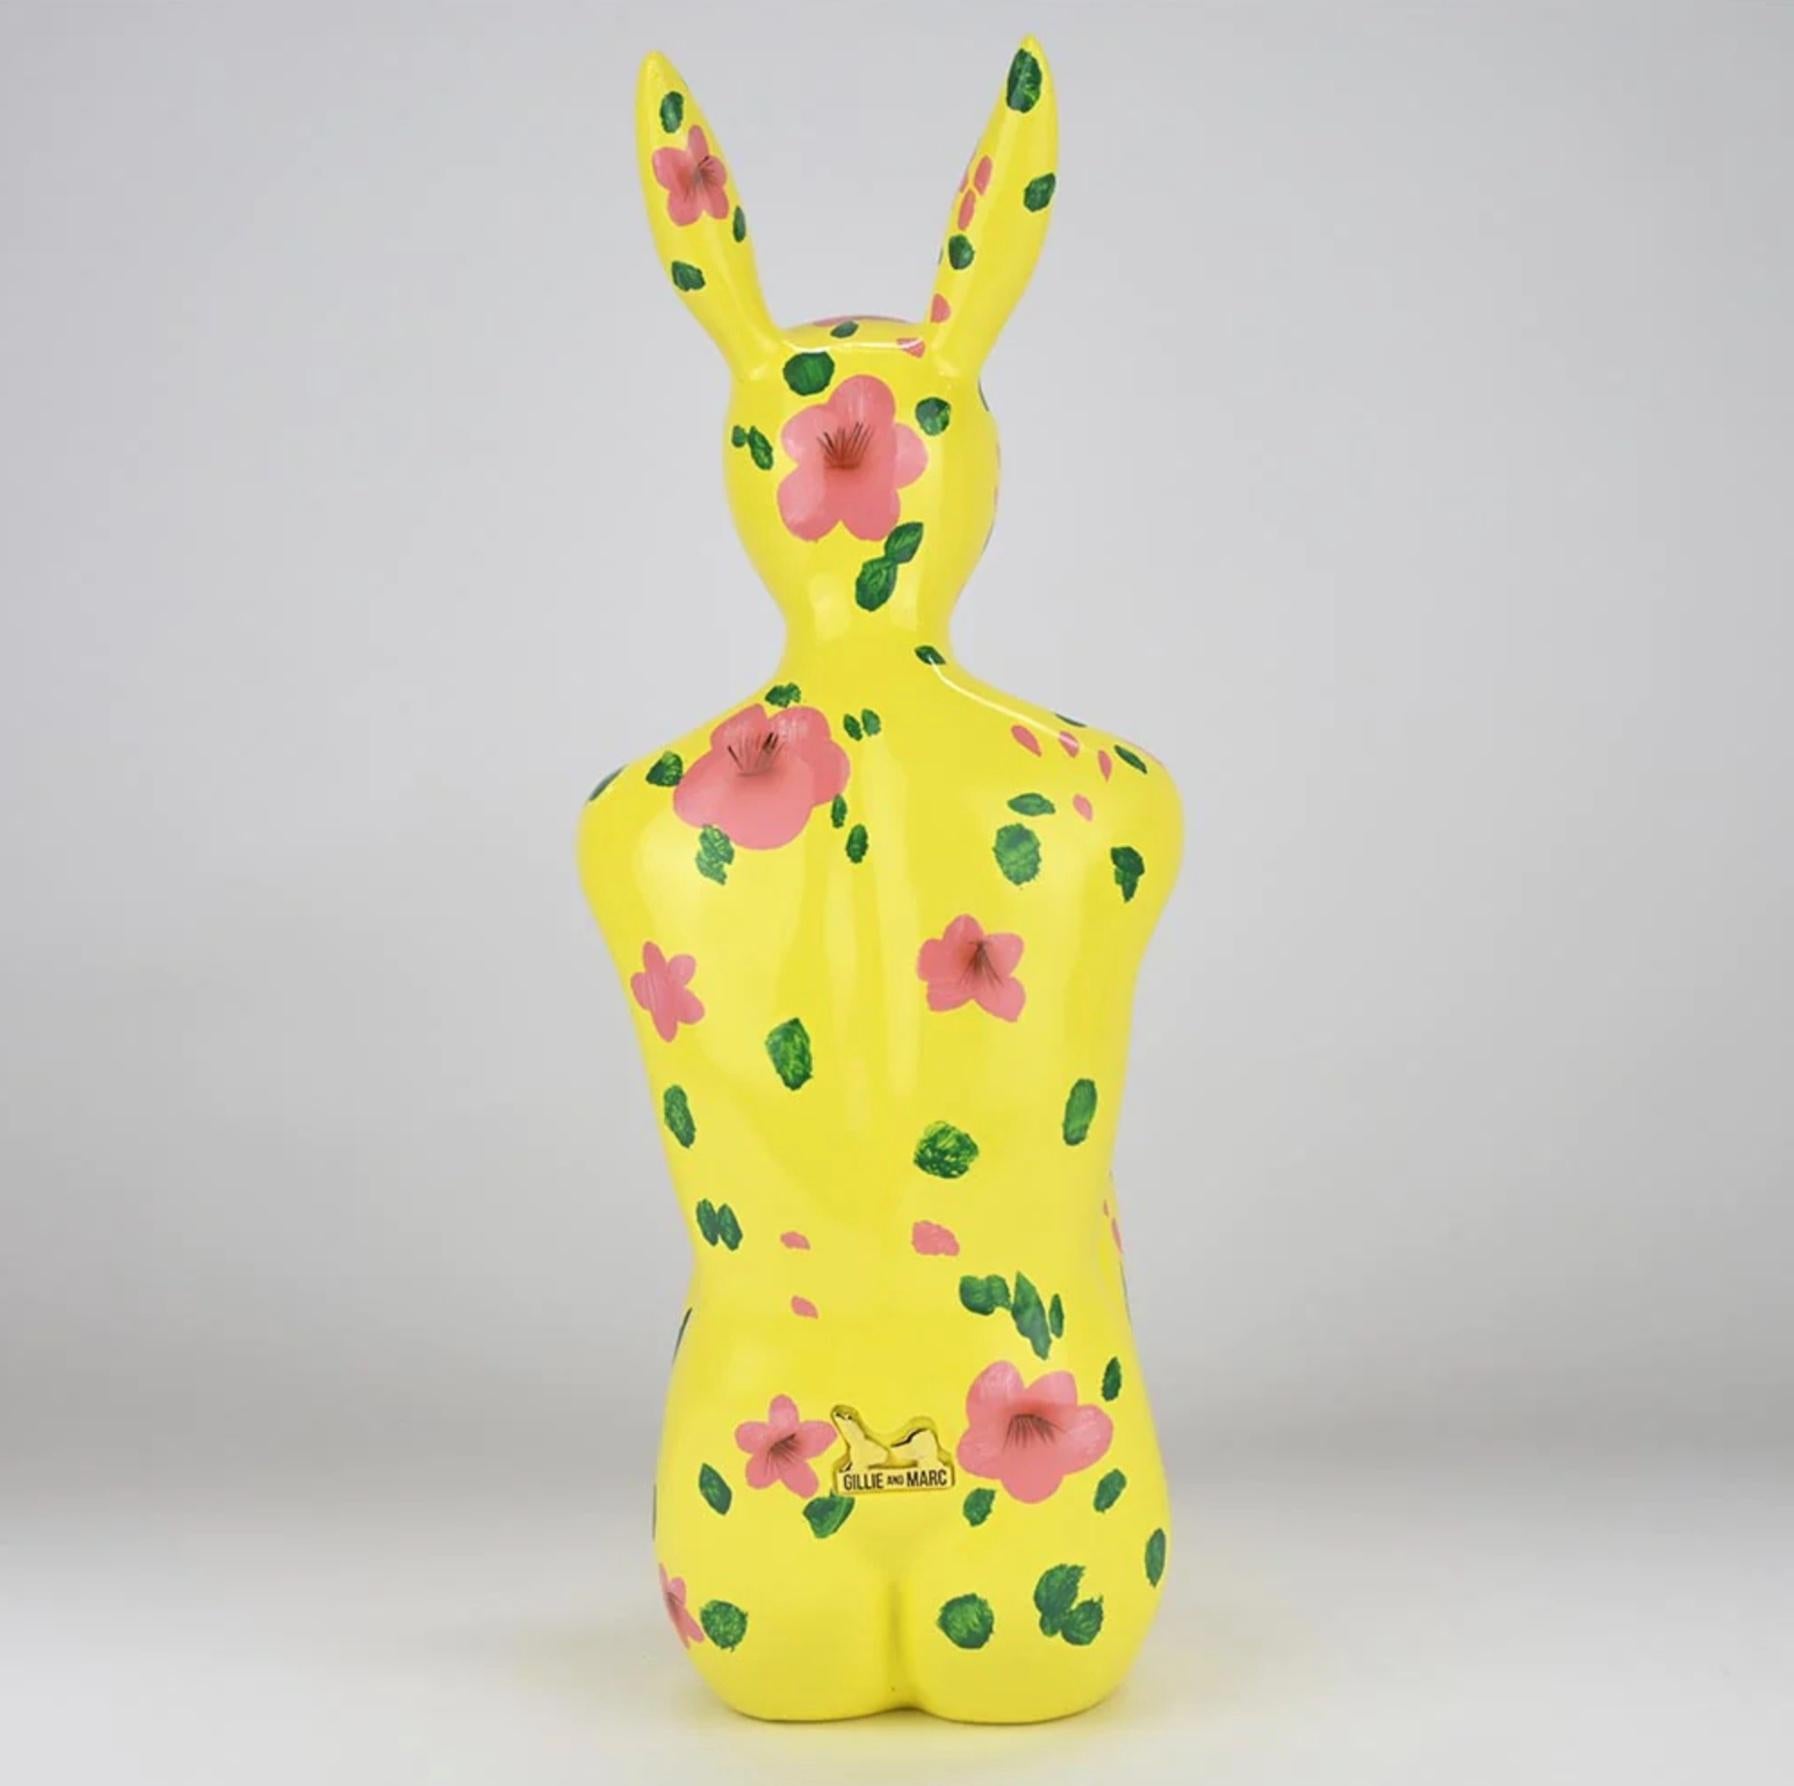 Title: Splash Pop City Bunny (Hawaiian Holiday Style)
Authentic Resin Sculpture

This authentic bronze sculpture titled 'Splash Pop City Bunny' in Hawaiian Holiday Style by artists Gillie and Marc has been meticulously crafted in resin. This